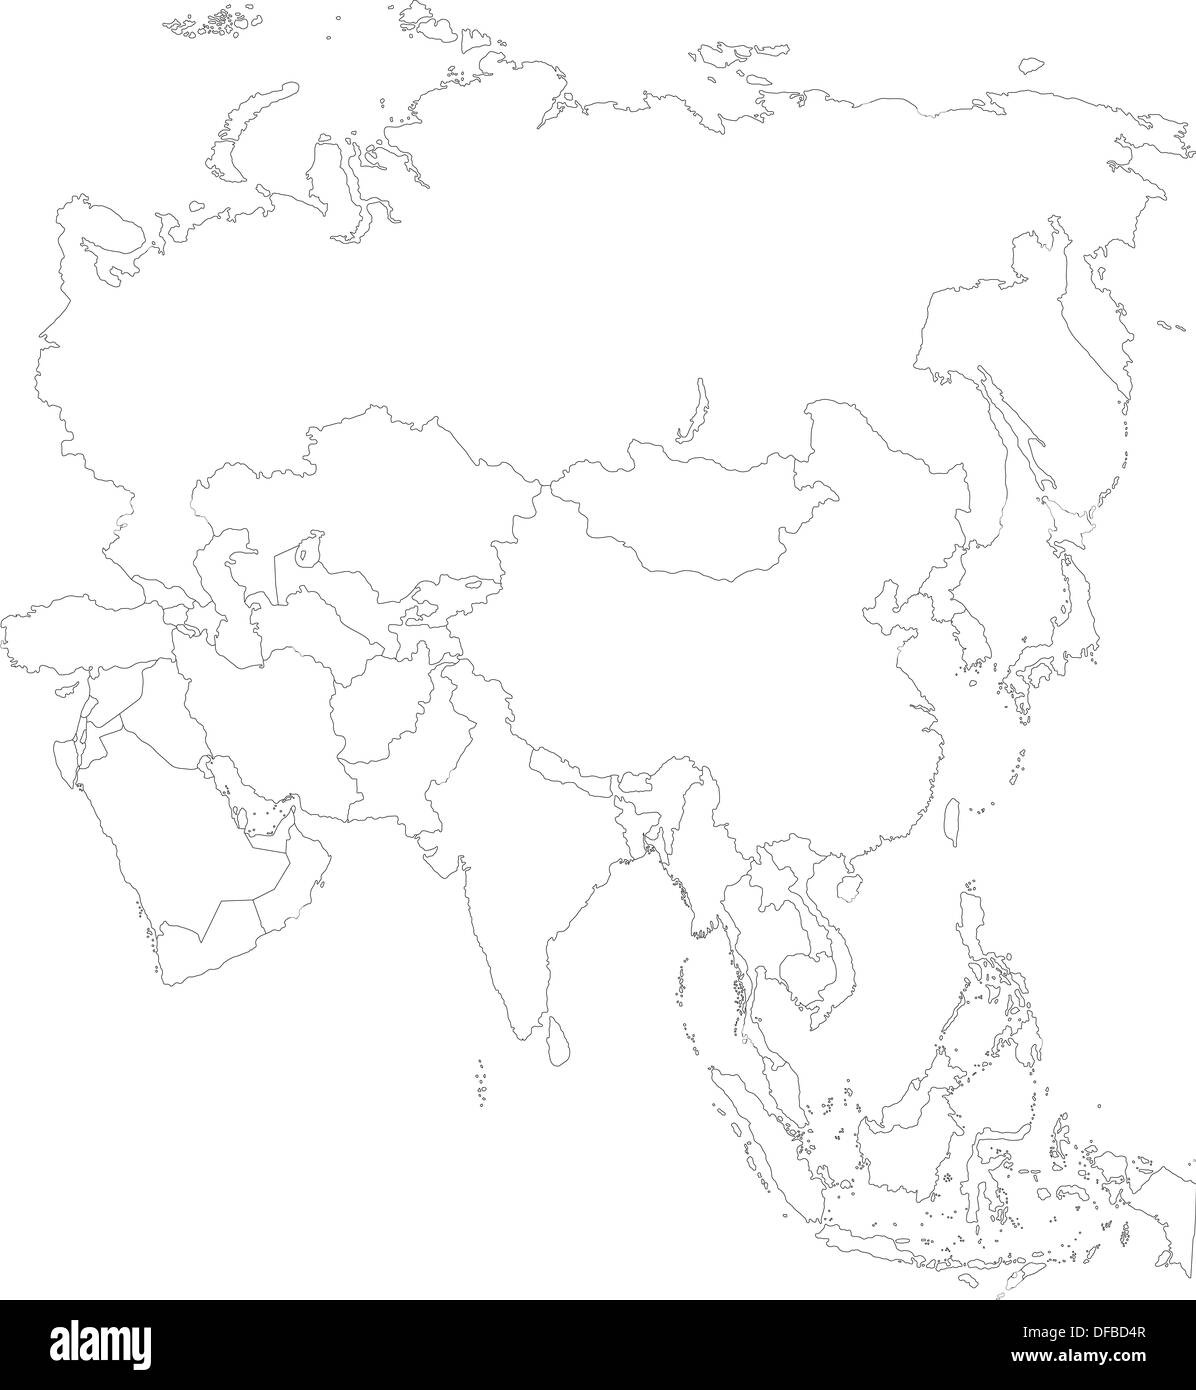 Outline Asia map Stock Photo